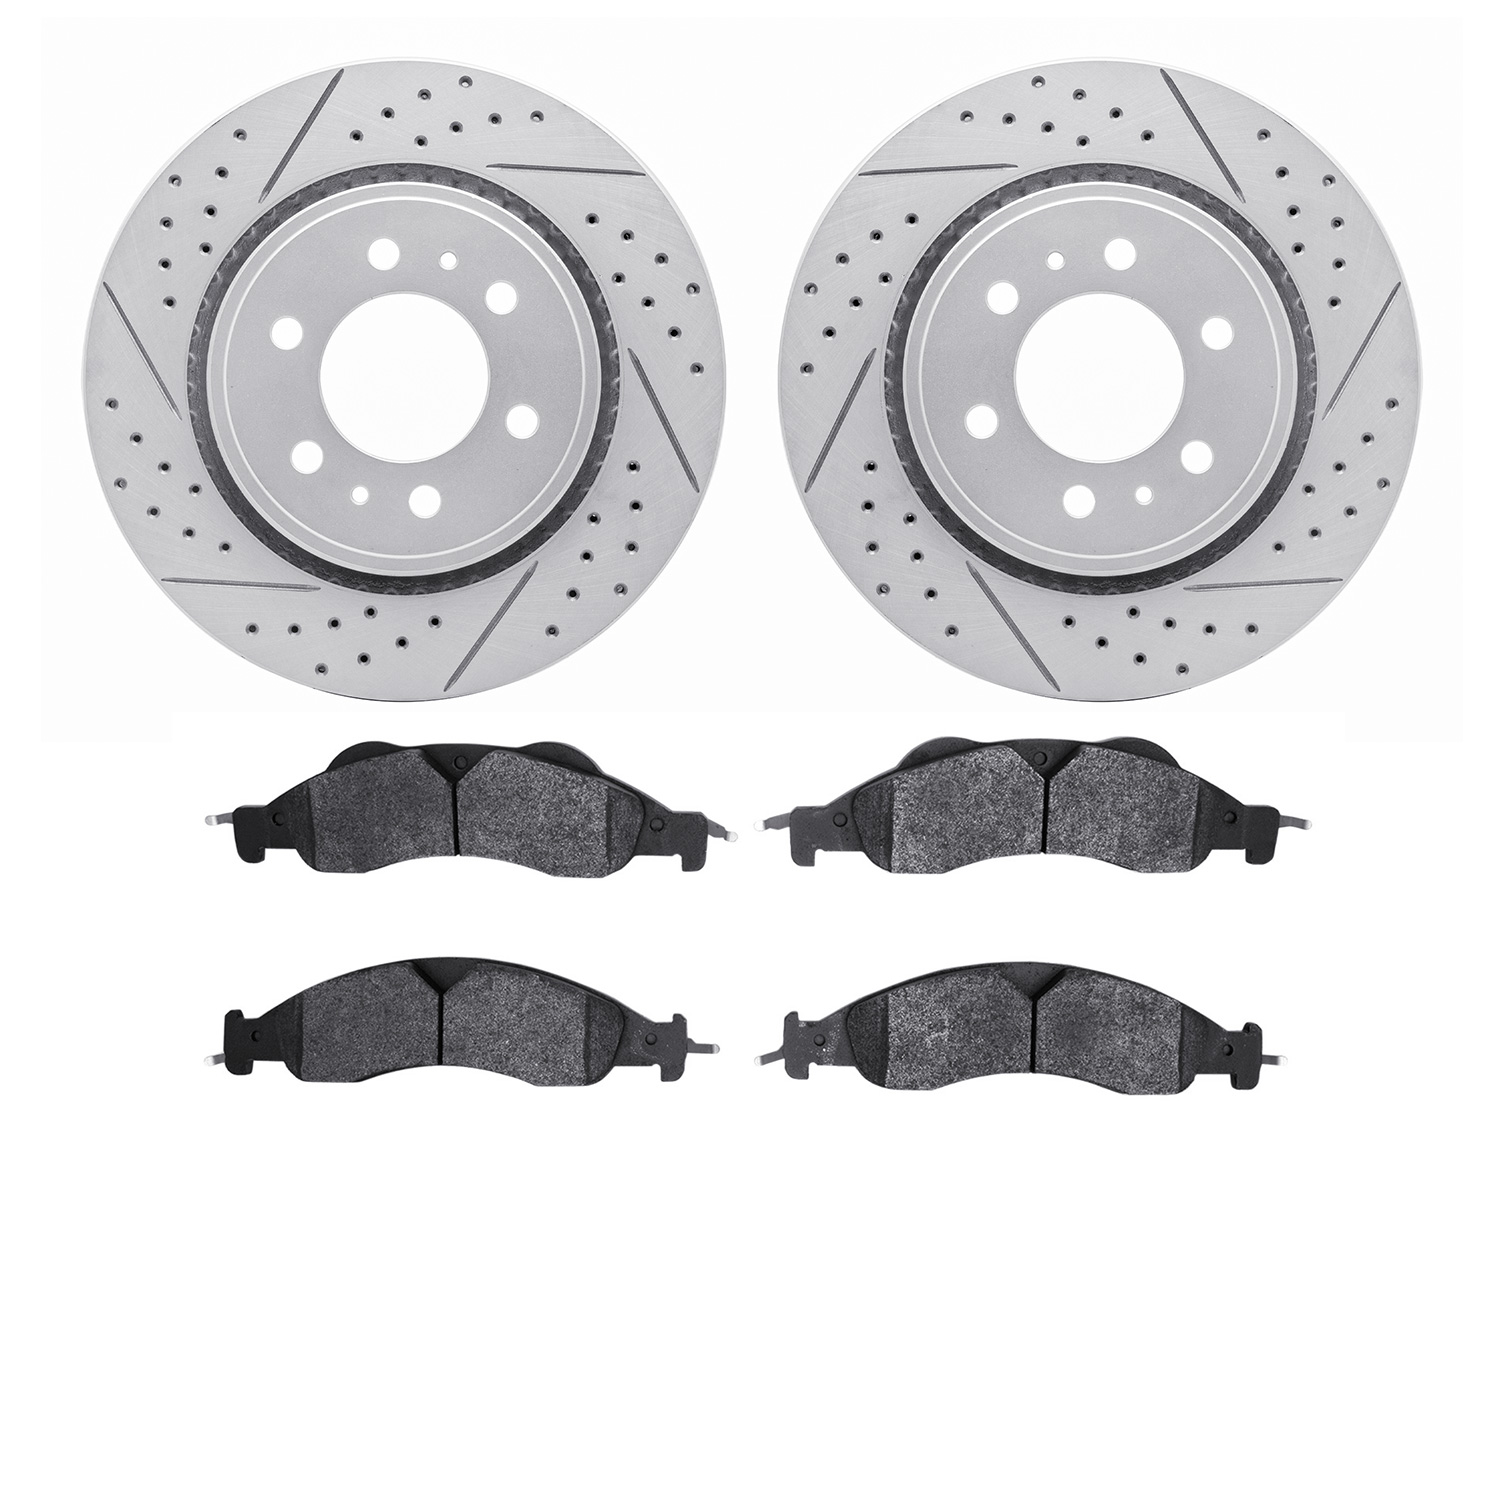 2202-99161 Geoperformance Drilled/Slotted Rotors w/Heavy-Duty Pads Kit, 2007-2009 Ford/Lincoln/Mercury/Mazda, Position: Front